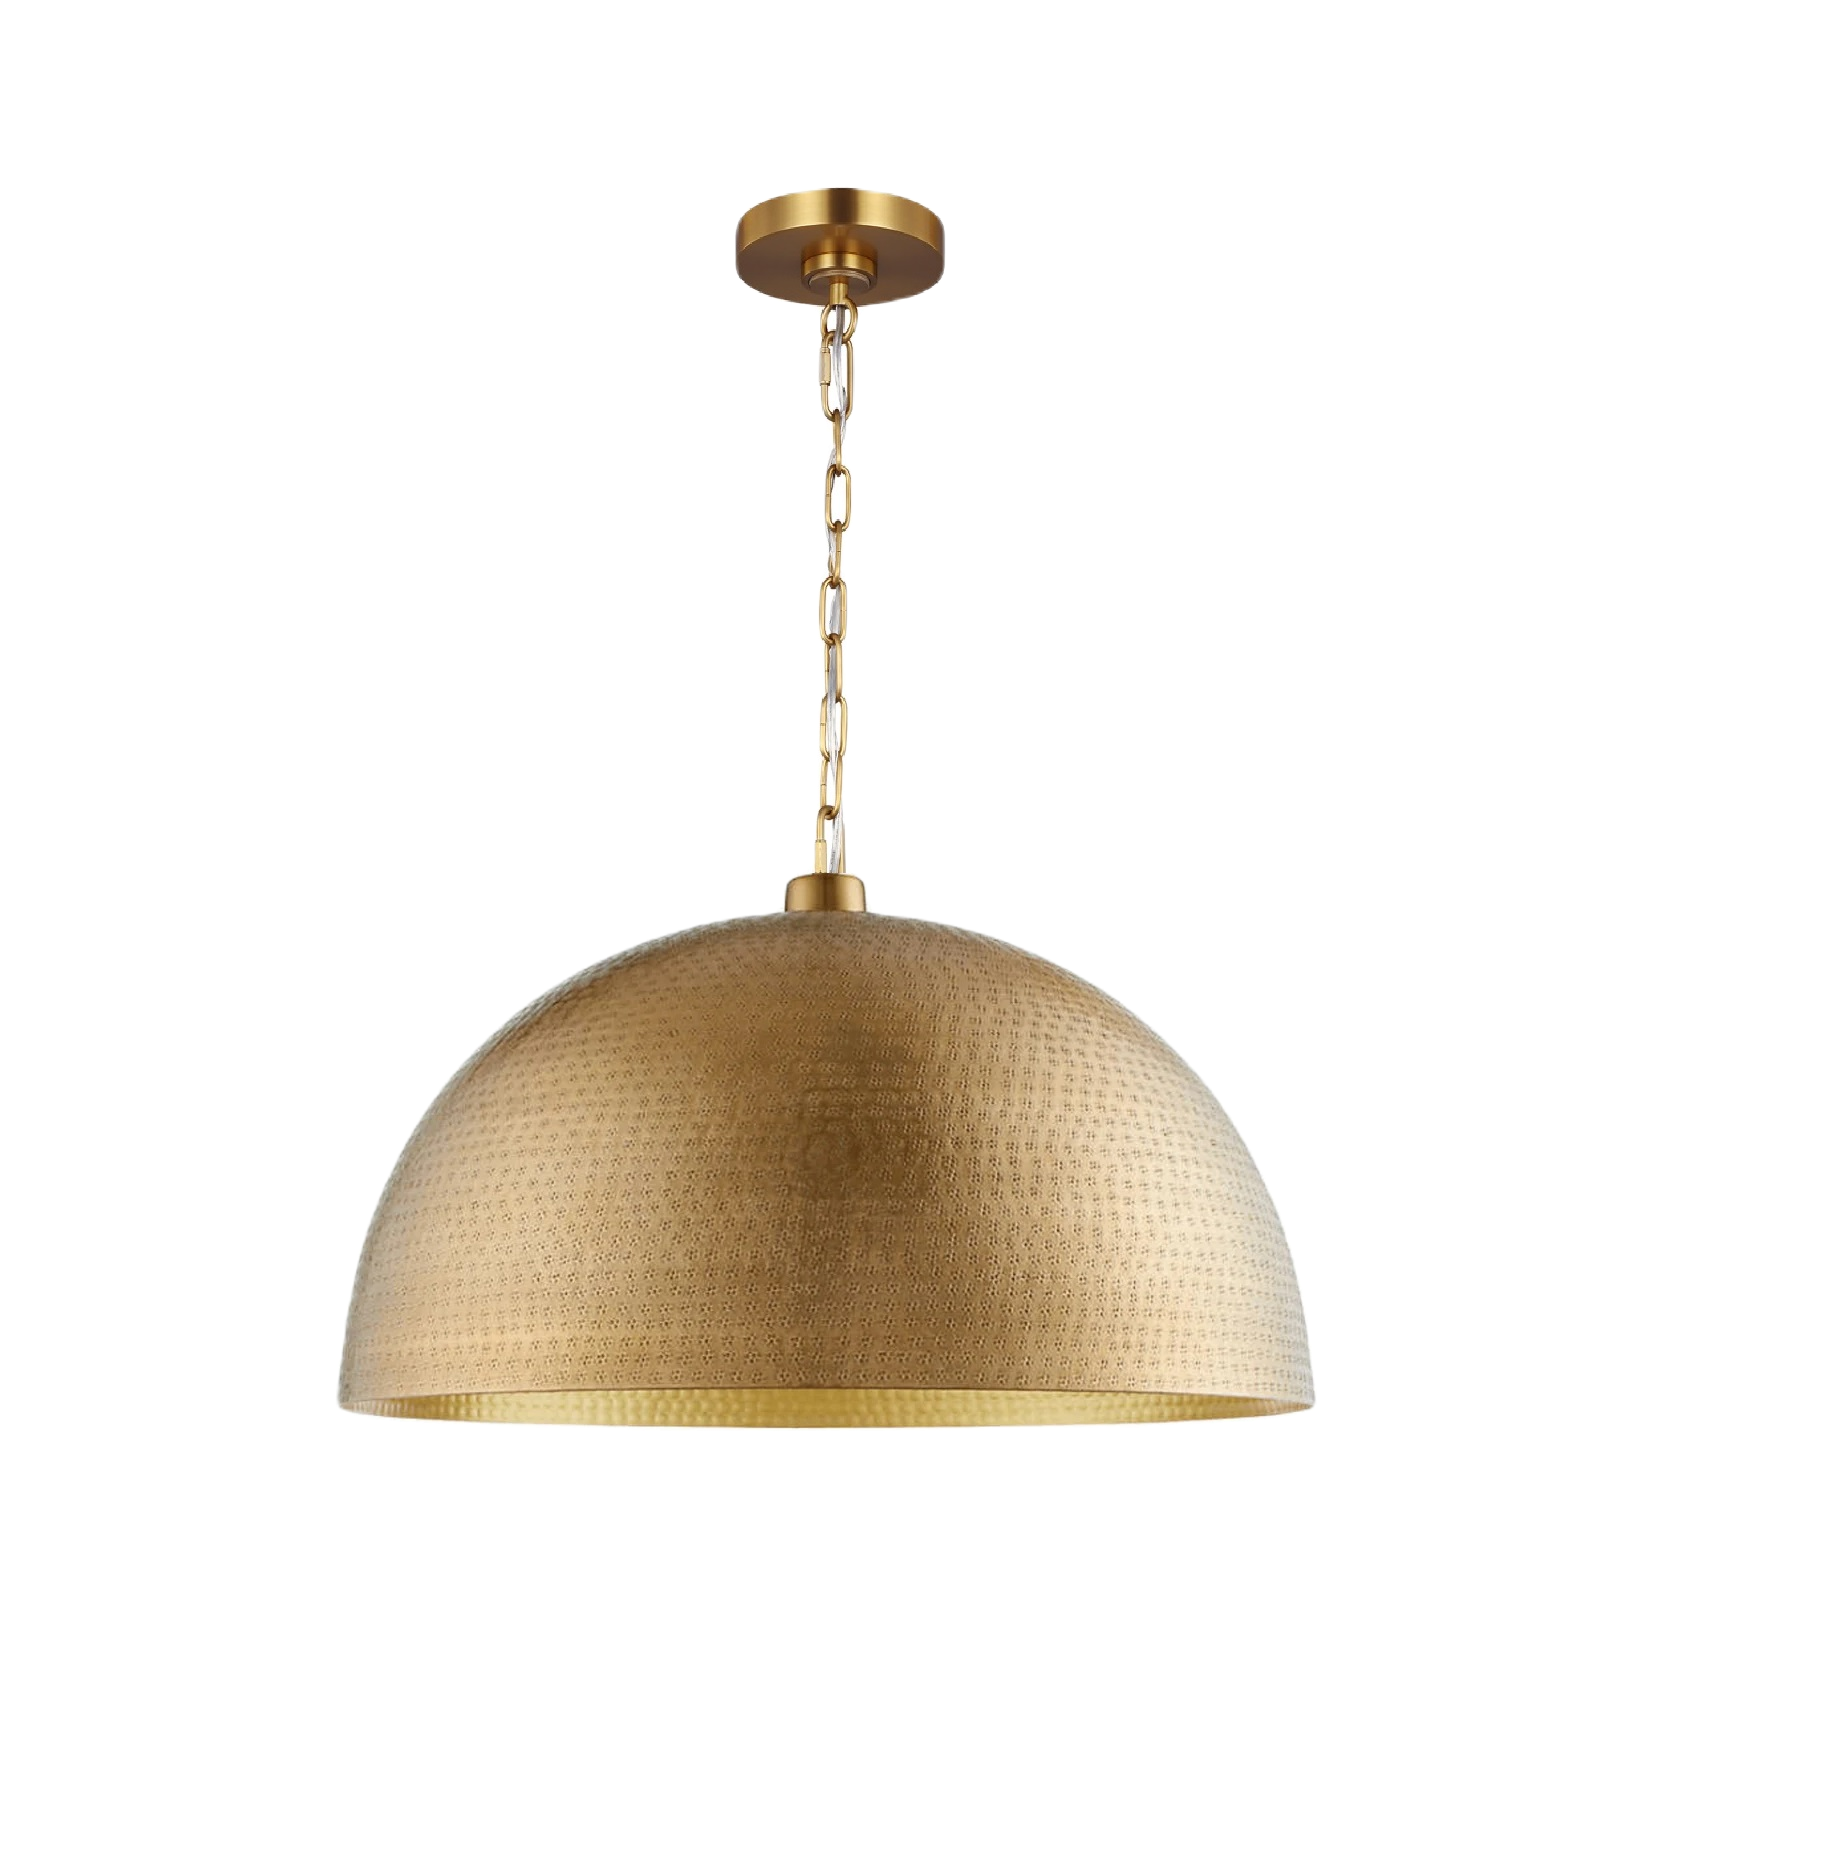 Brass Dome Pendant light Hanging  Lamp kitchen light fixture ,Pendant Lamp-Dome Brass Light-Gold, Came With Bulbs - Afoscraft